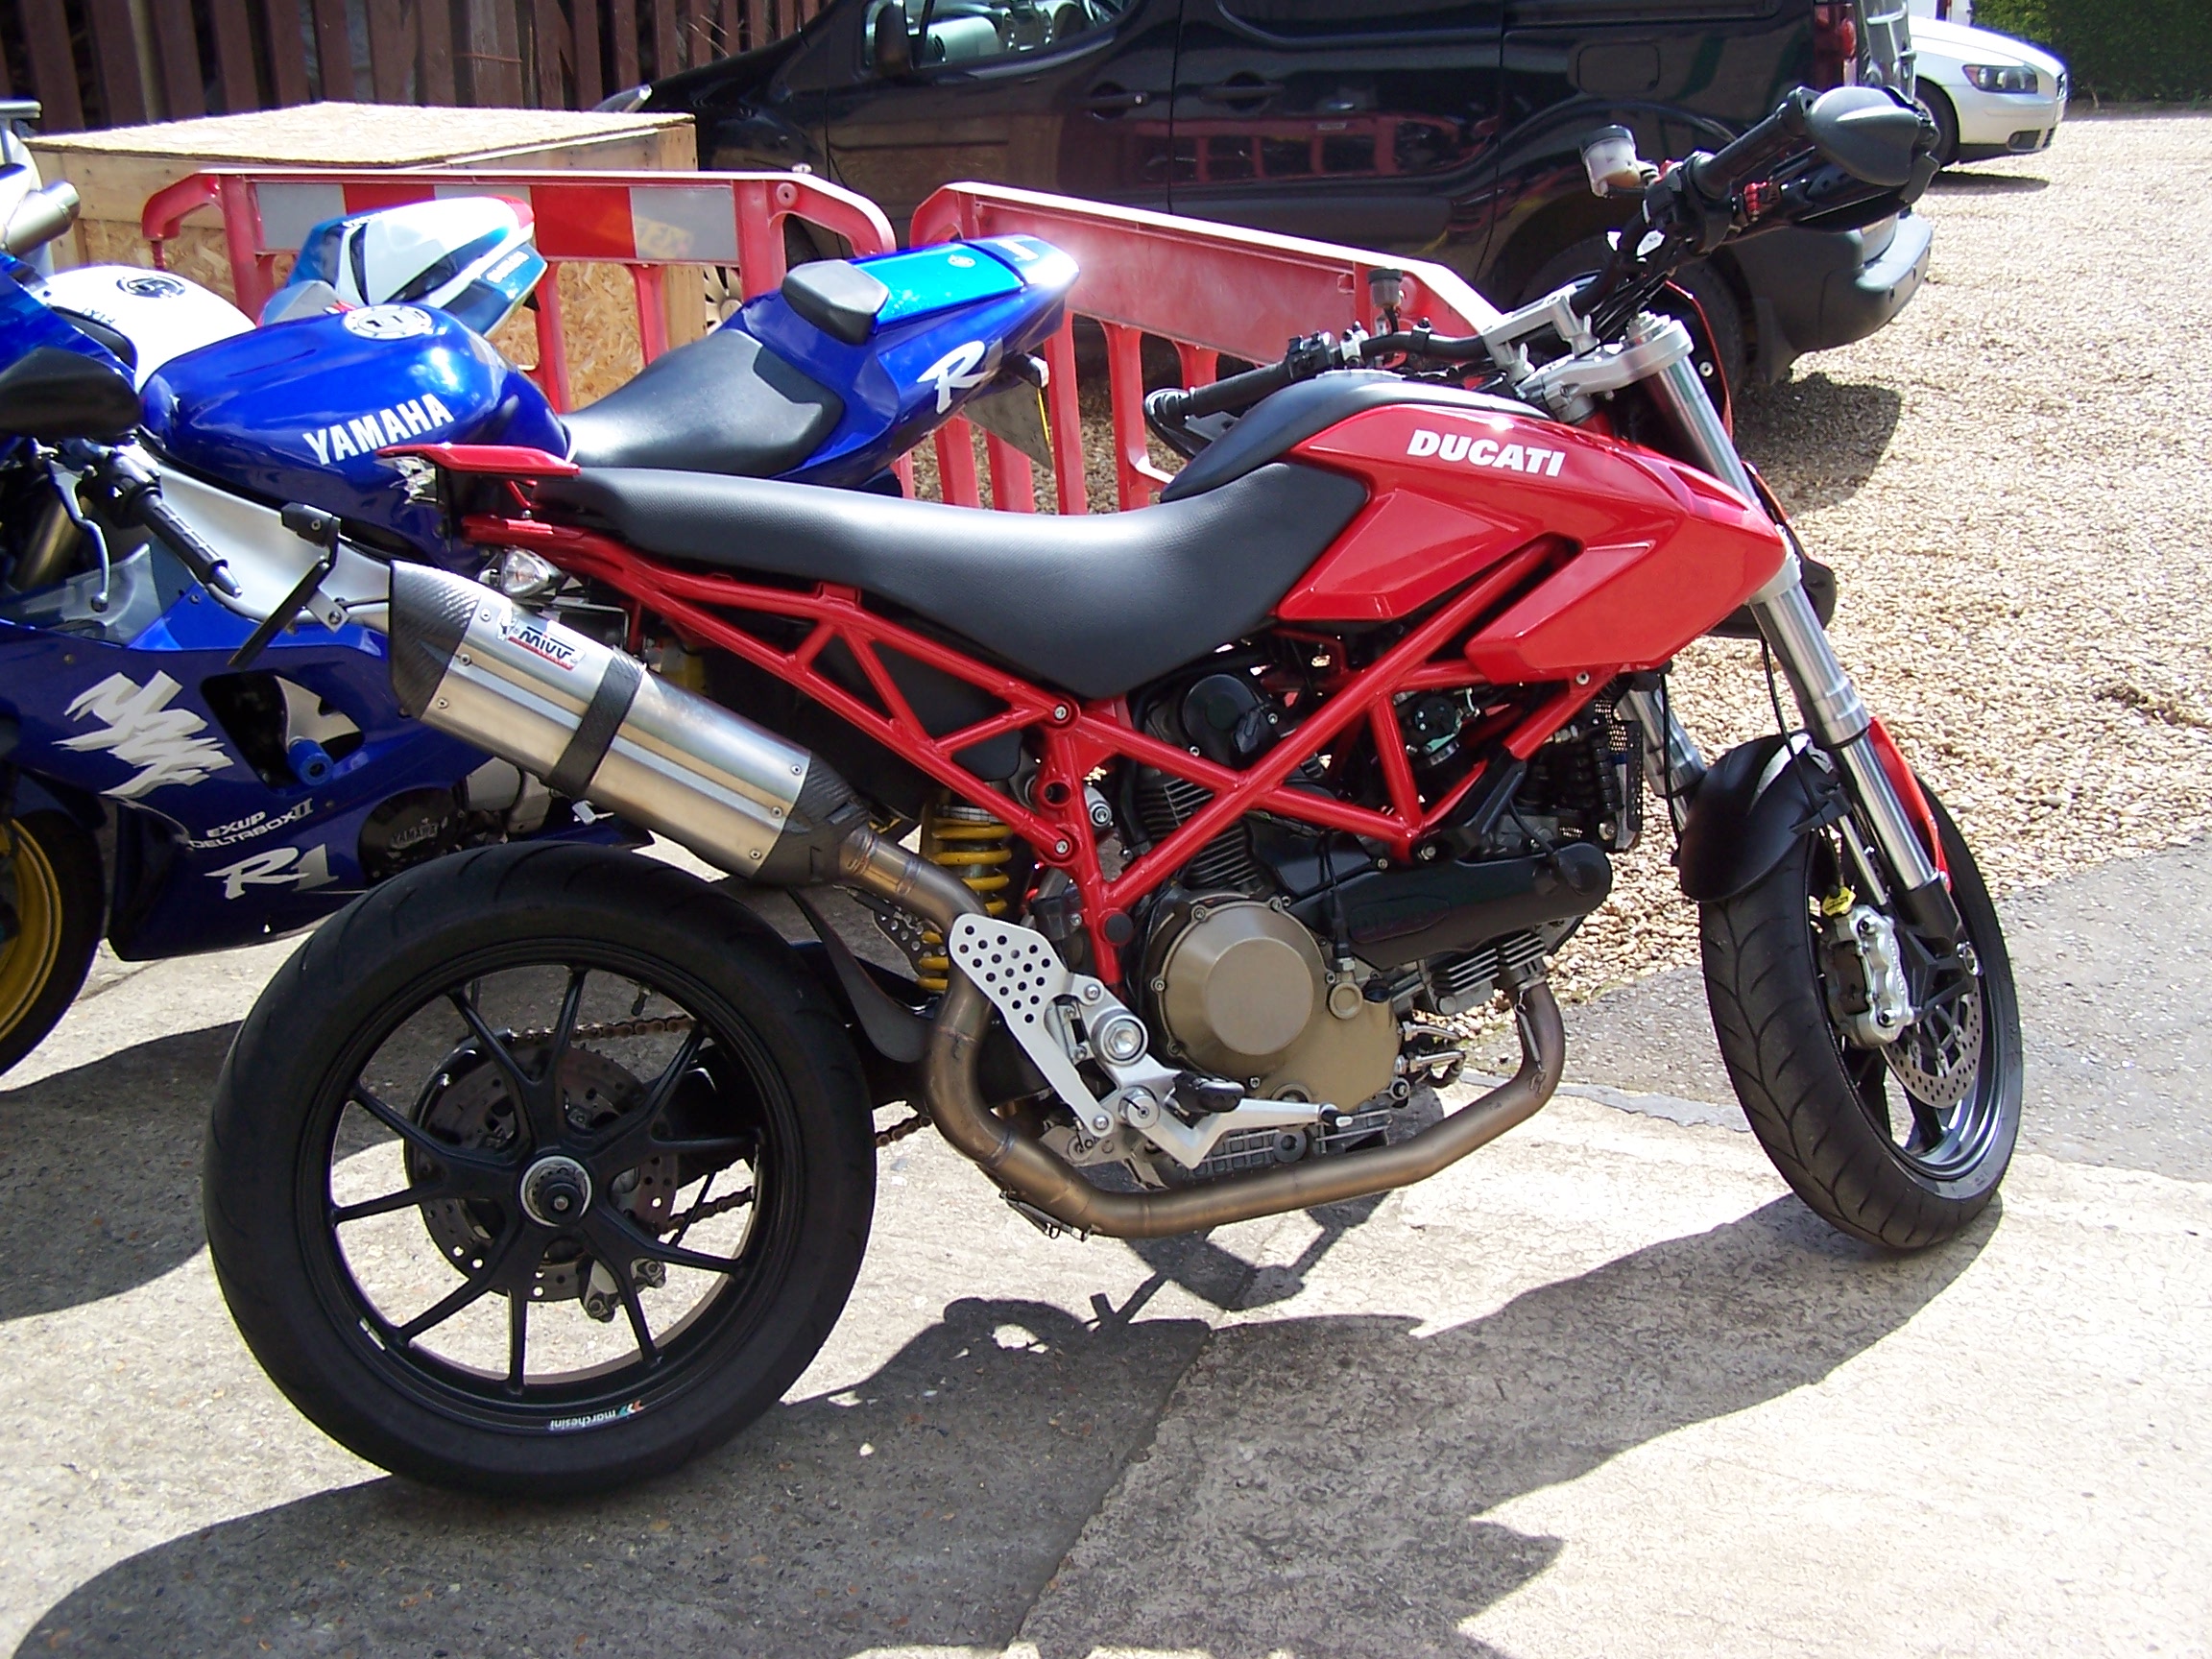 DUCATI HYPERMOTARD 1100 WITH MIVV EXHAUST AND OPEN POD FILTERS